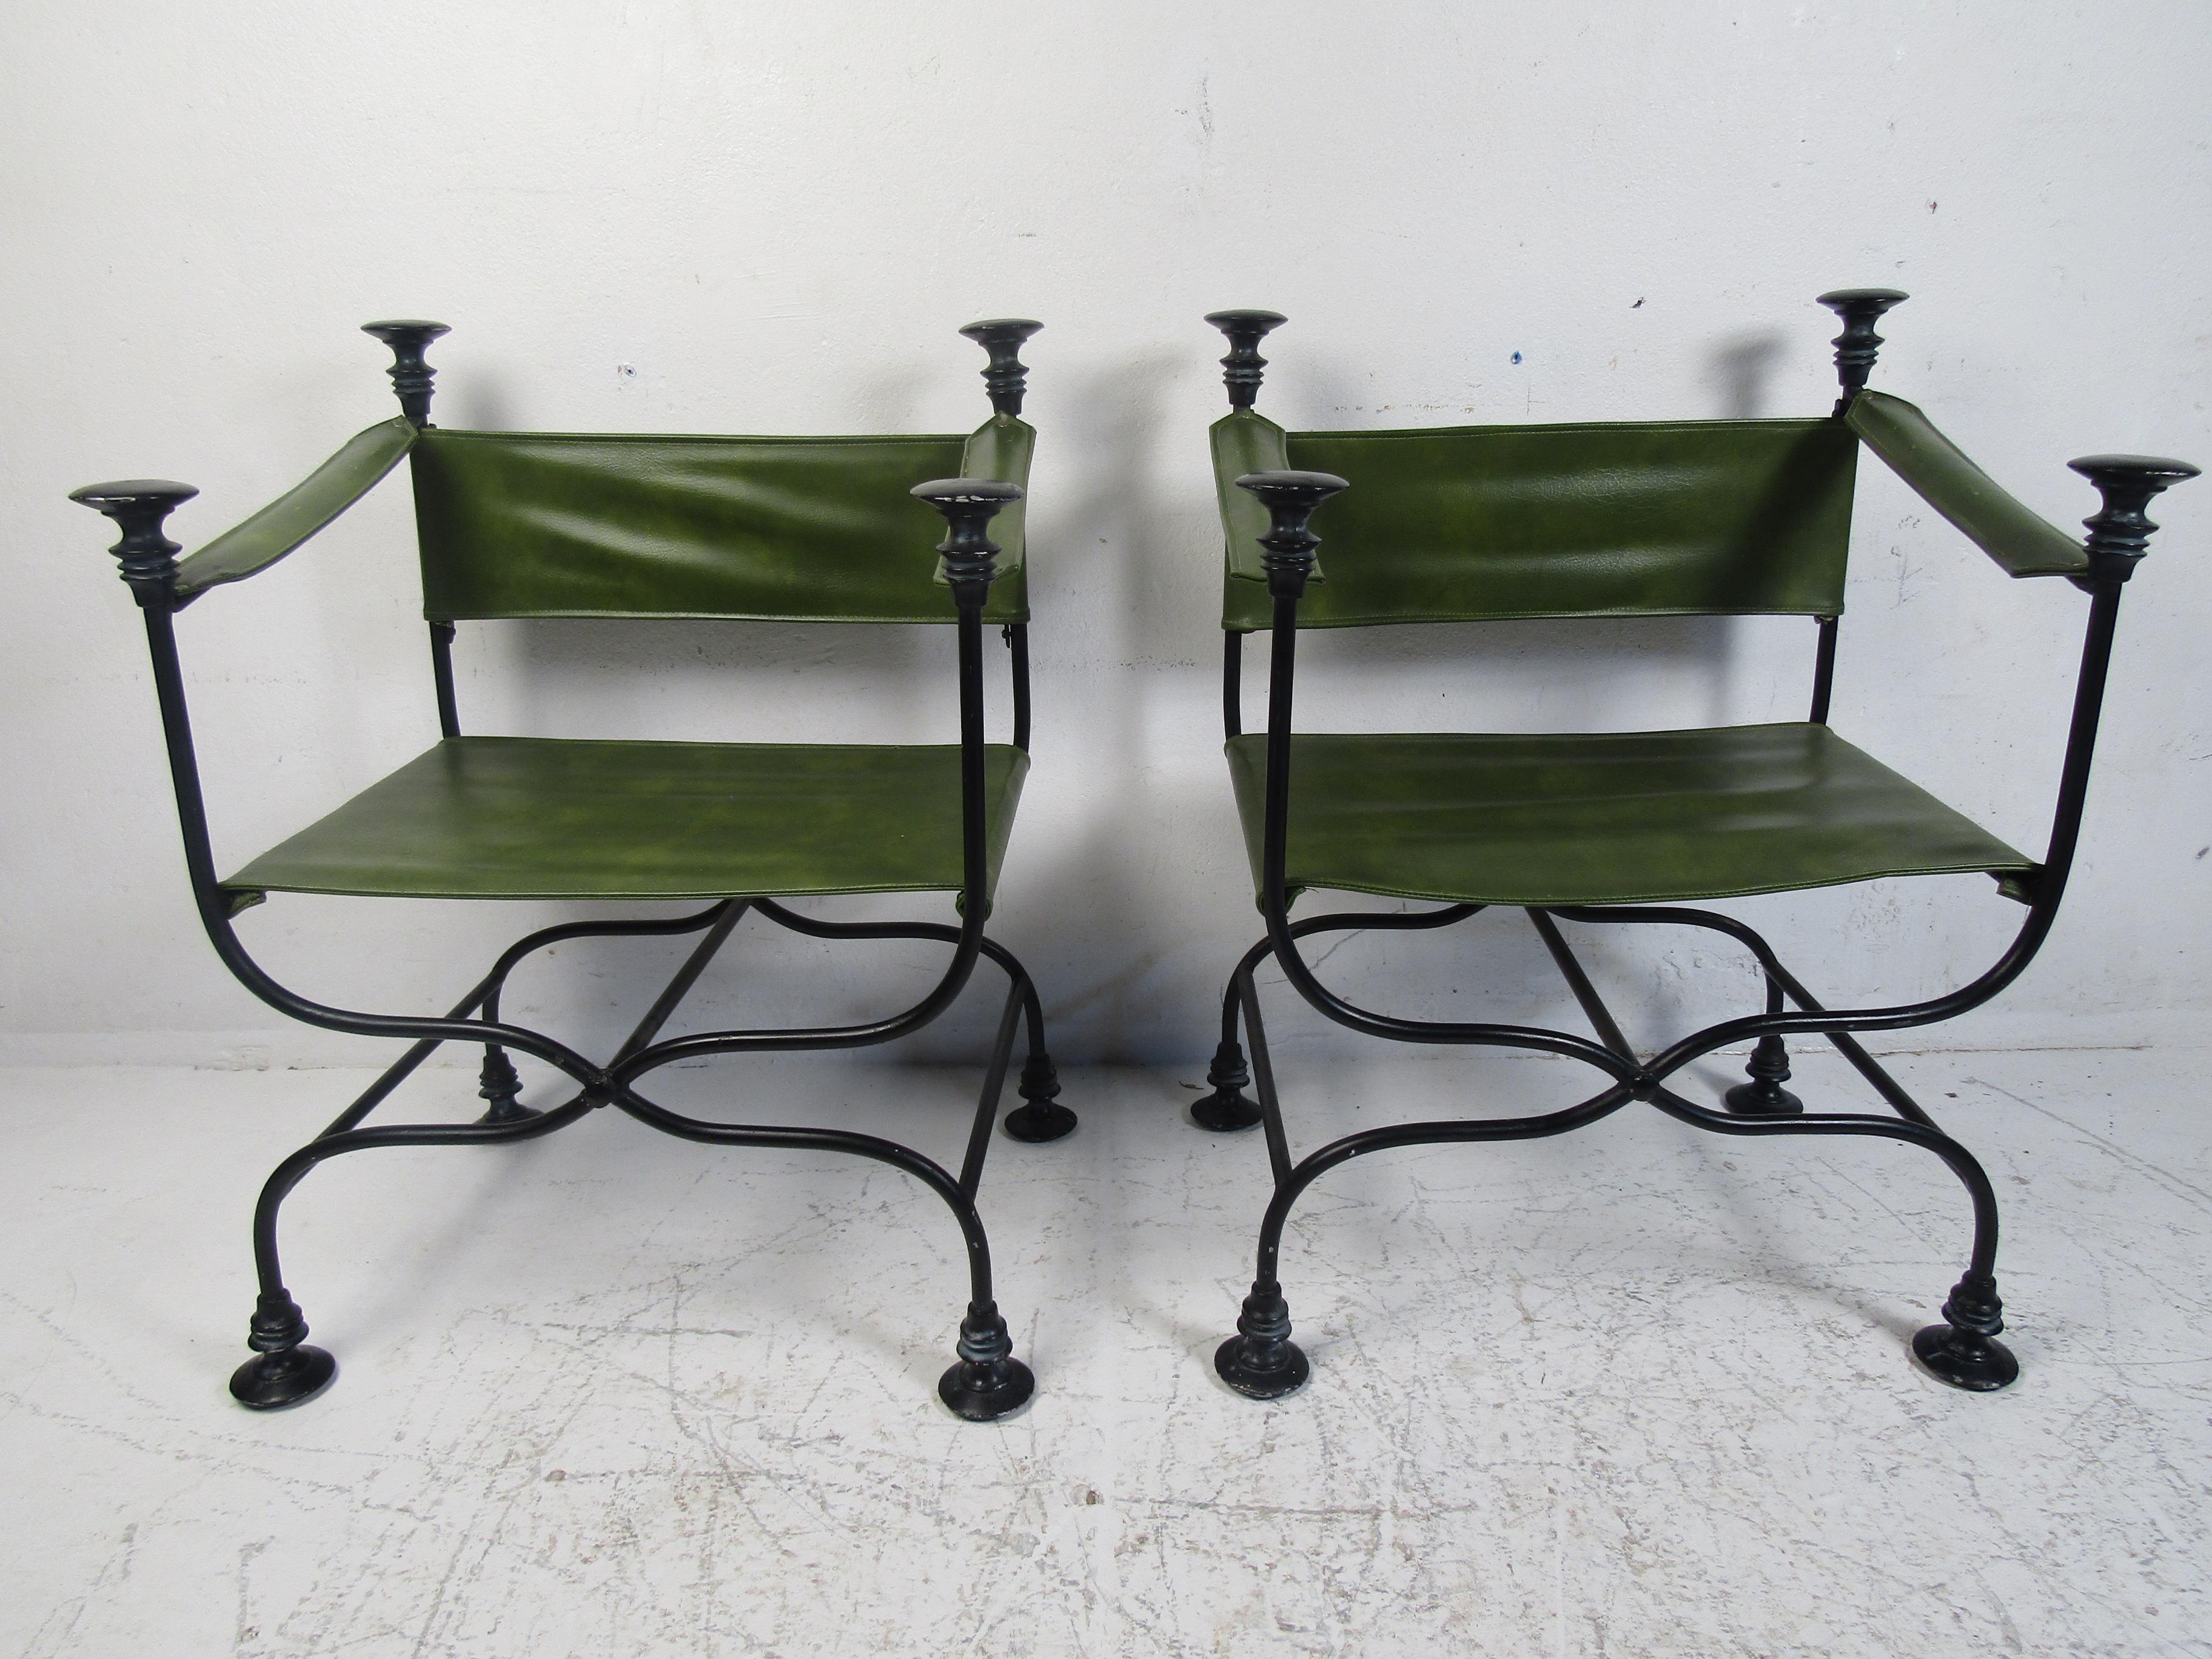 cast iron chairs for sale